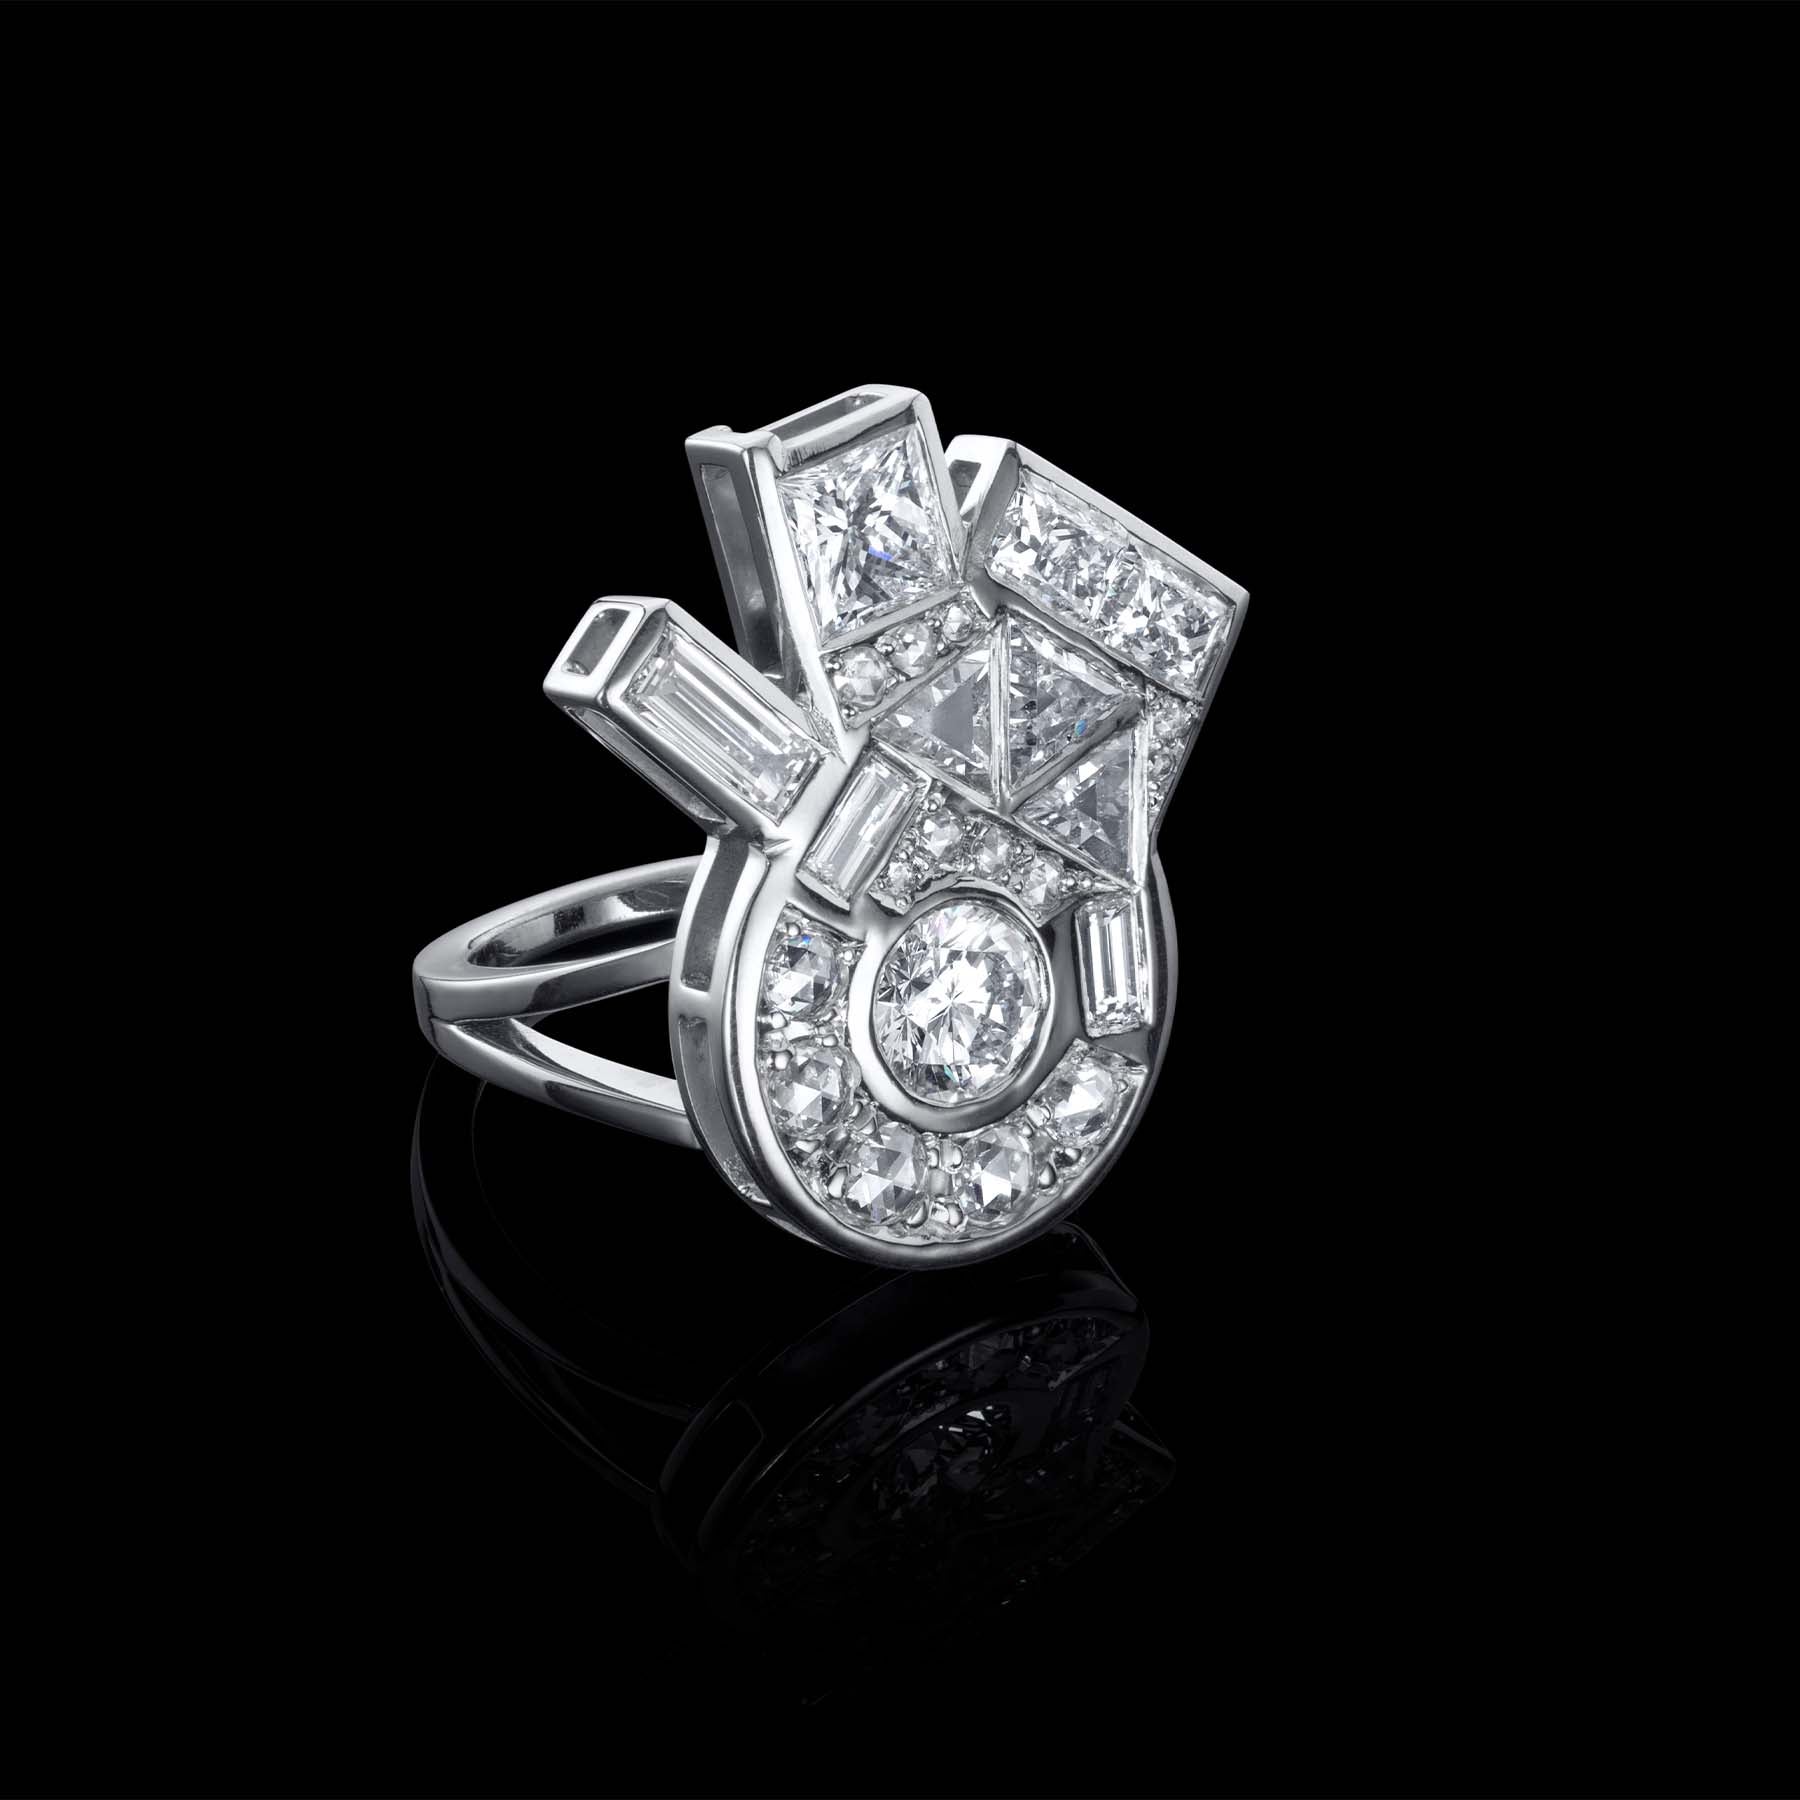 Benfey Ring by designer Solange Azagury-Partridge - 18 carat white gold and diamonds - Front view